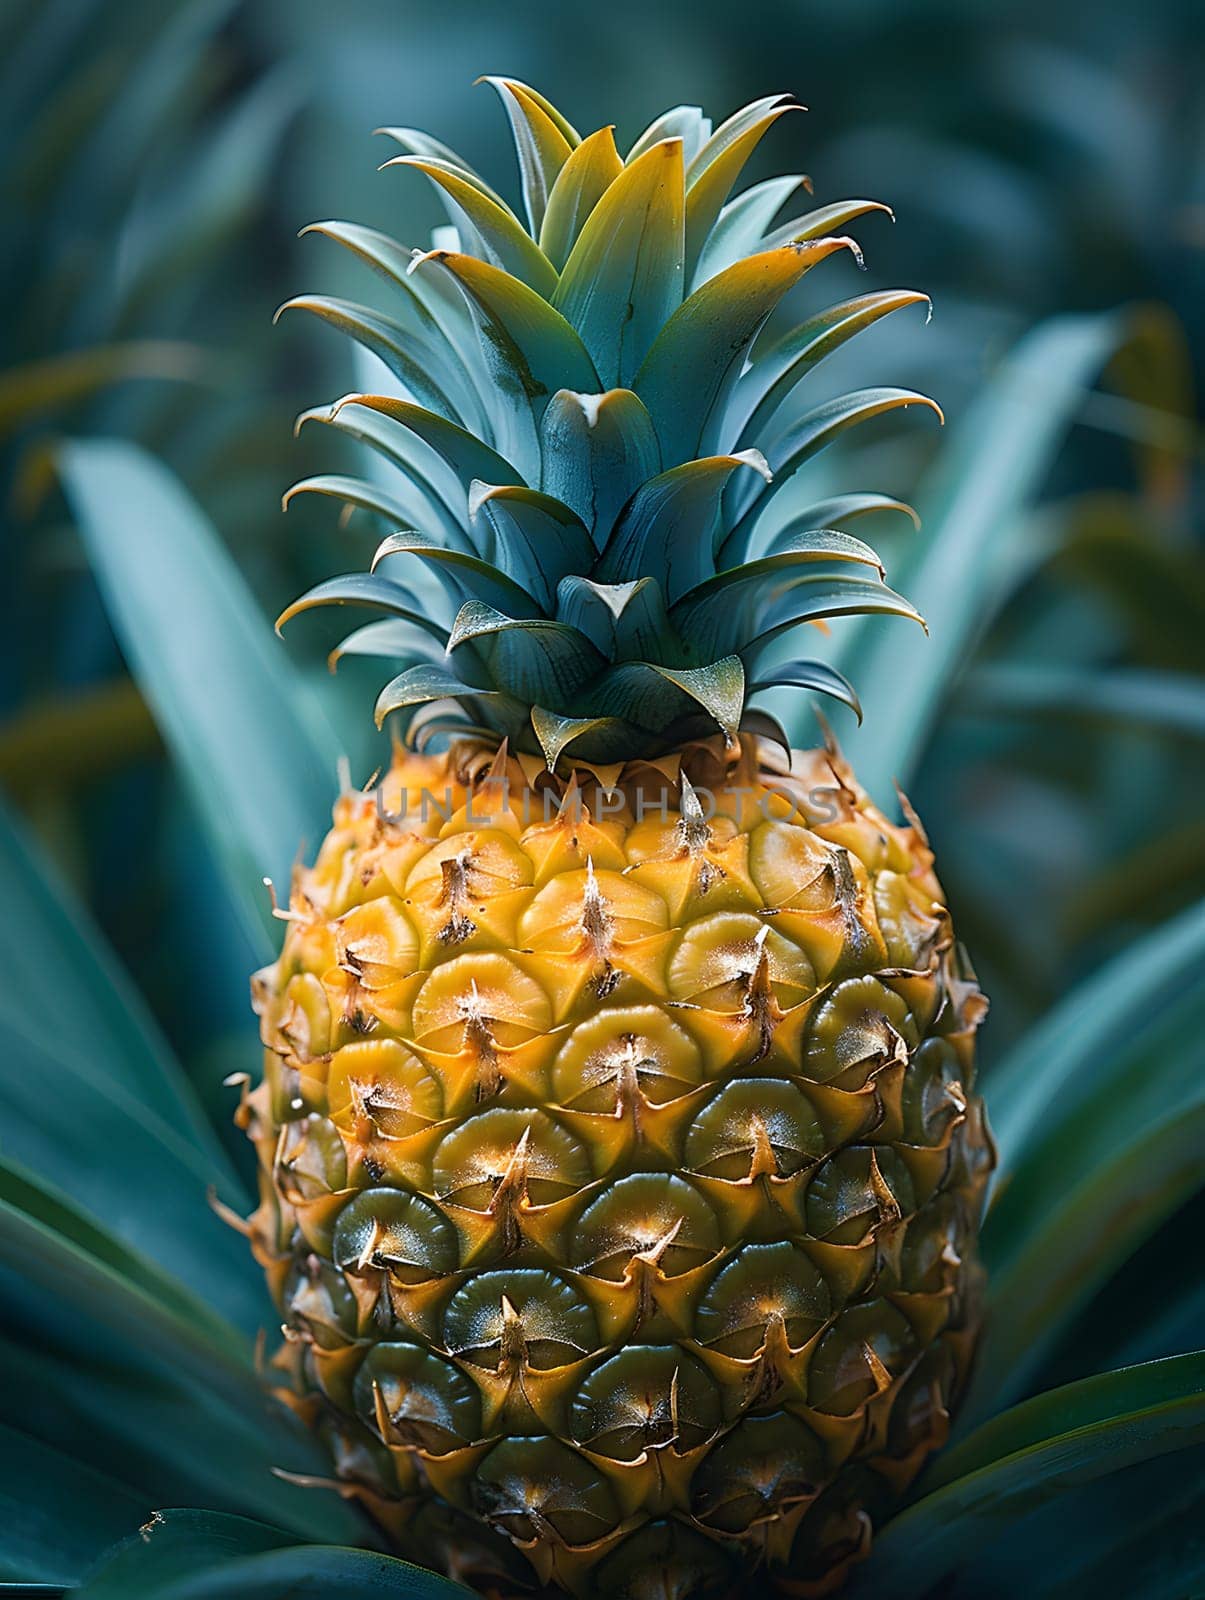 A pineapple, also known as ananas, is a fruit that grows on a terrestrial plant. It is a natural food produced by a flowering plant